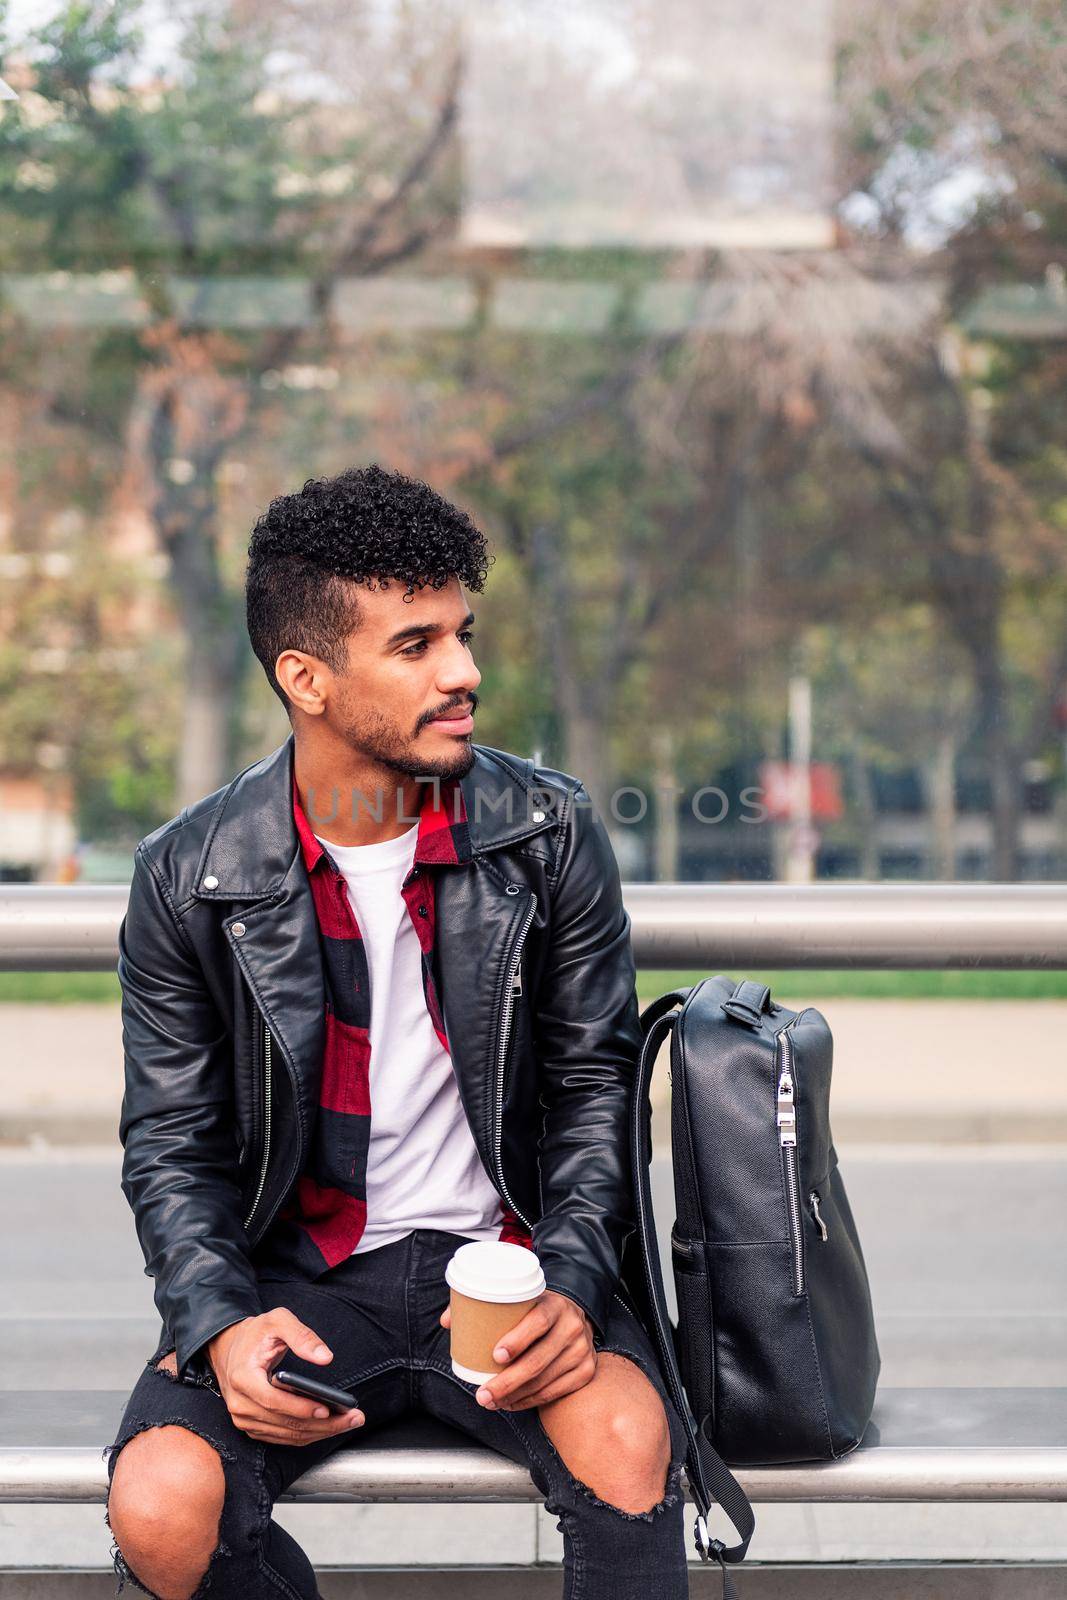 stylish latin student with phone and coffee in his hand waits for the arrival of public transportation seated at the bus stop, concept of sustainable transportation and urban lifestyle